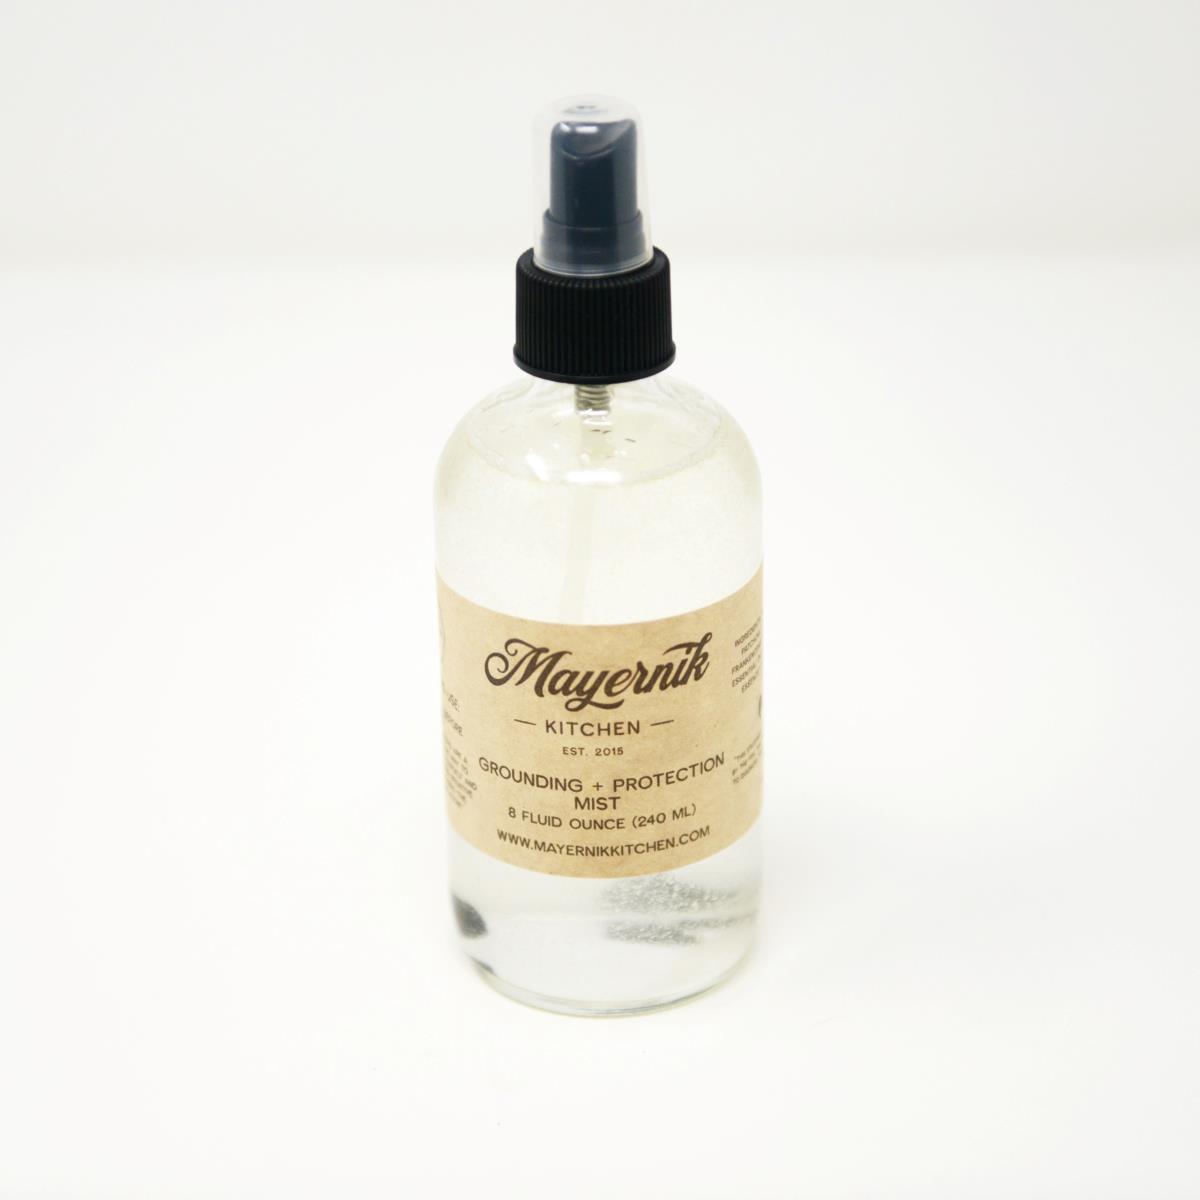 Grounding & Protection Mist